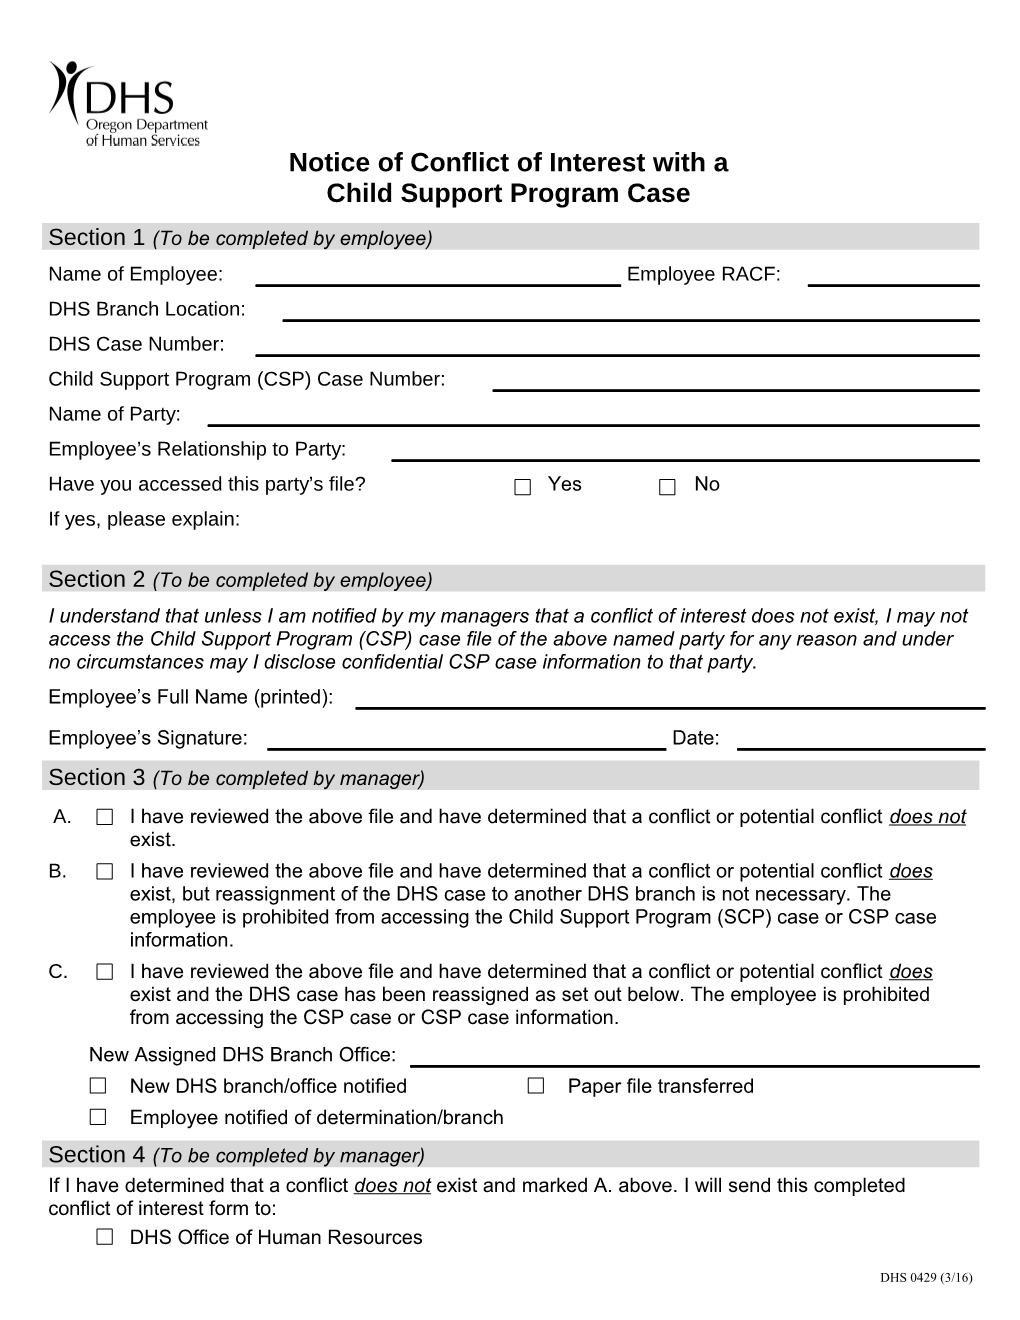 Notice of Conflict of Interest with a Chld Support Program Case (DHS 0429 (4/05))